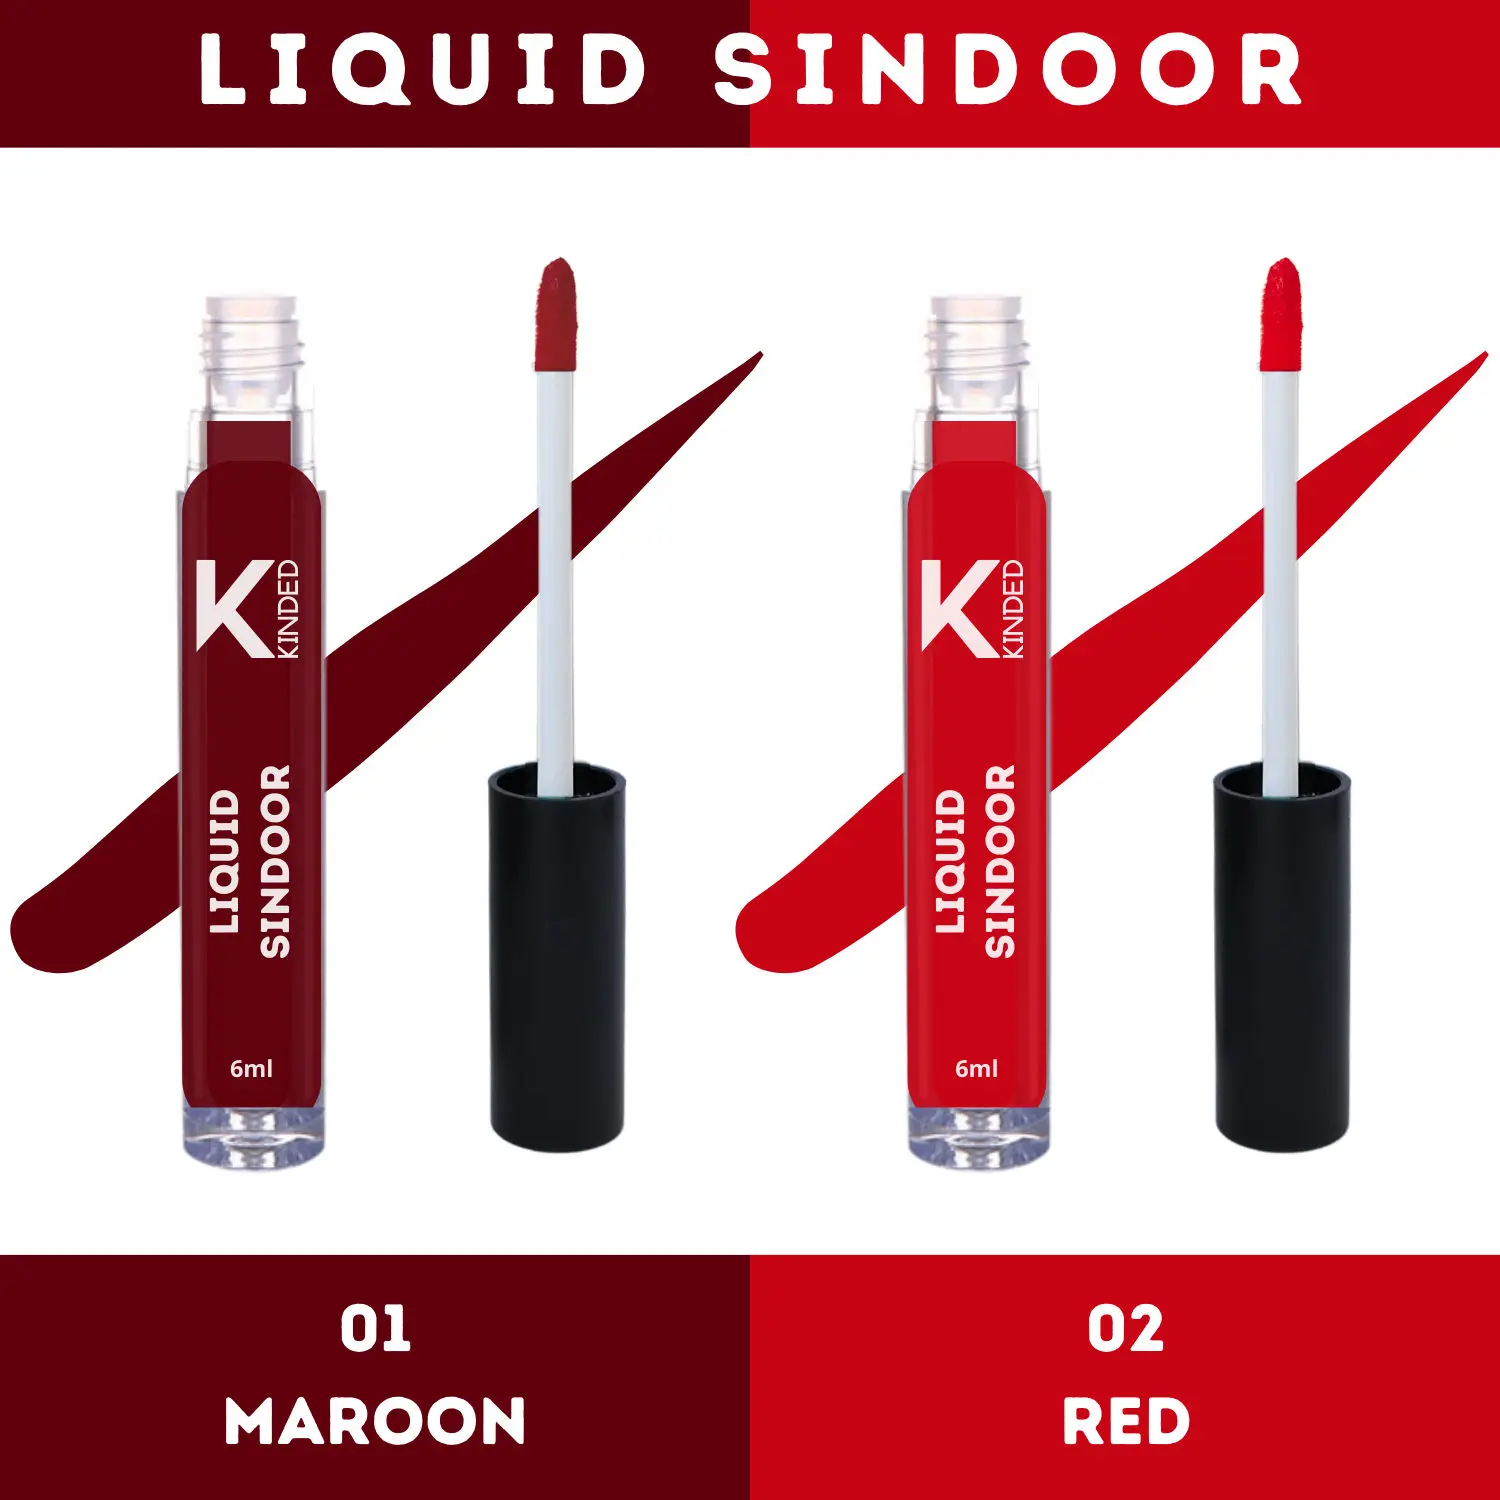 KINDED Liquid Sindoor Longlasting Water Resistant Smudge Proof Quick Drying Bridal Sindur Kumkum for Women with Sponge Tip Applicator Stick (6 ml each, Matte Finish, Combo Pack Maroon & Red Colour)